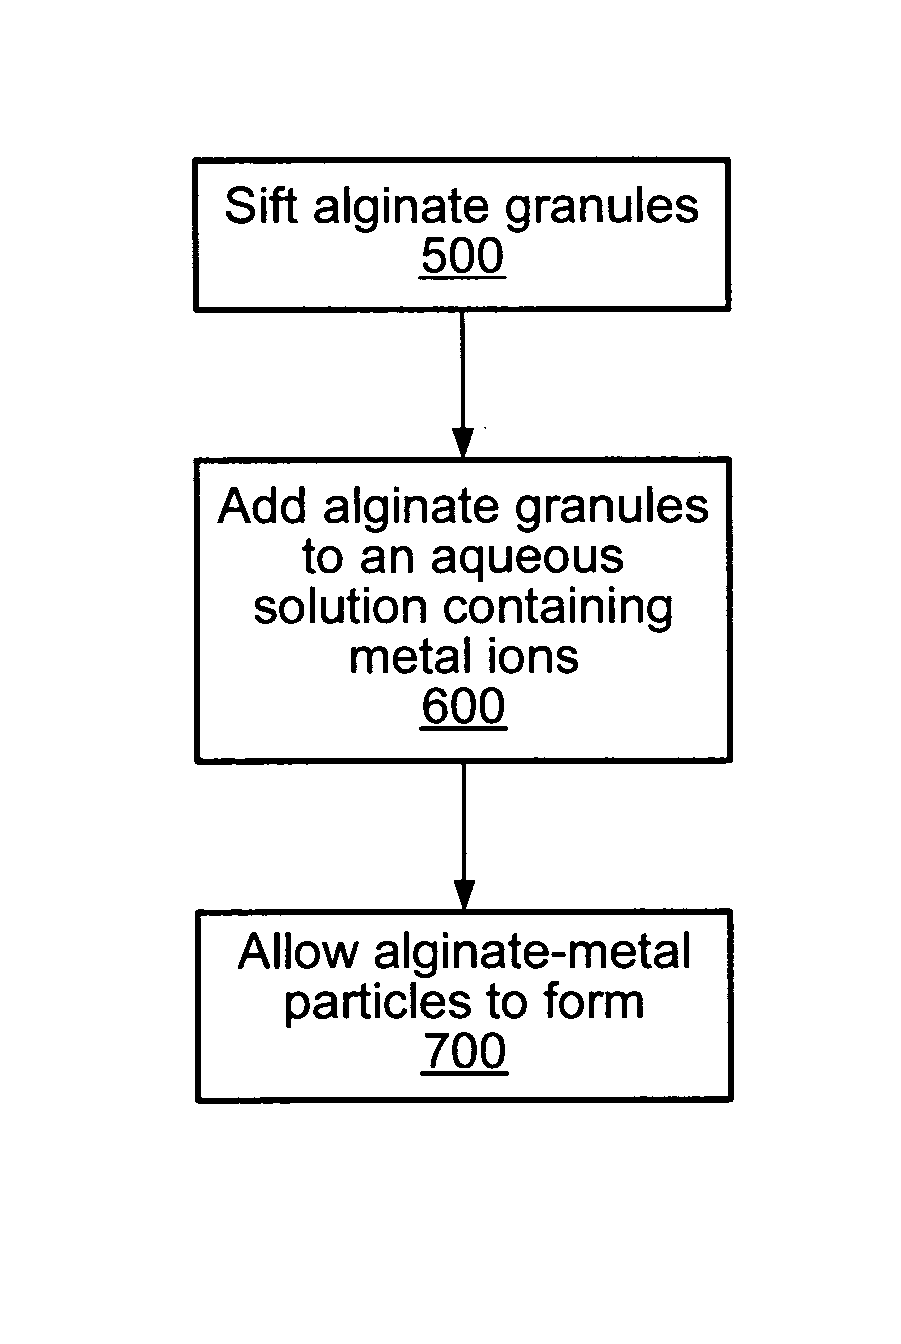 Systems and methods of reducing metal compounds from fluids using alginate beads